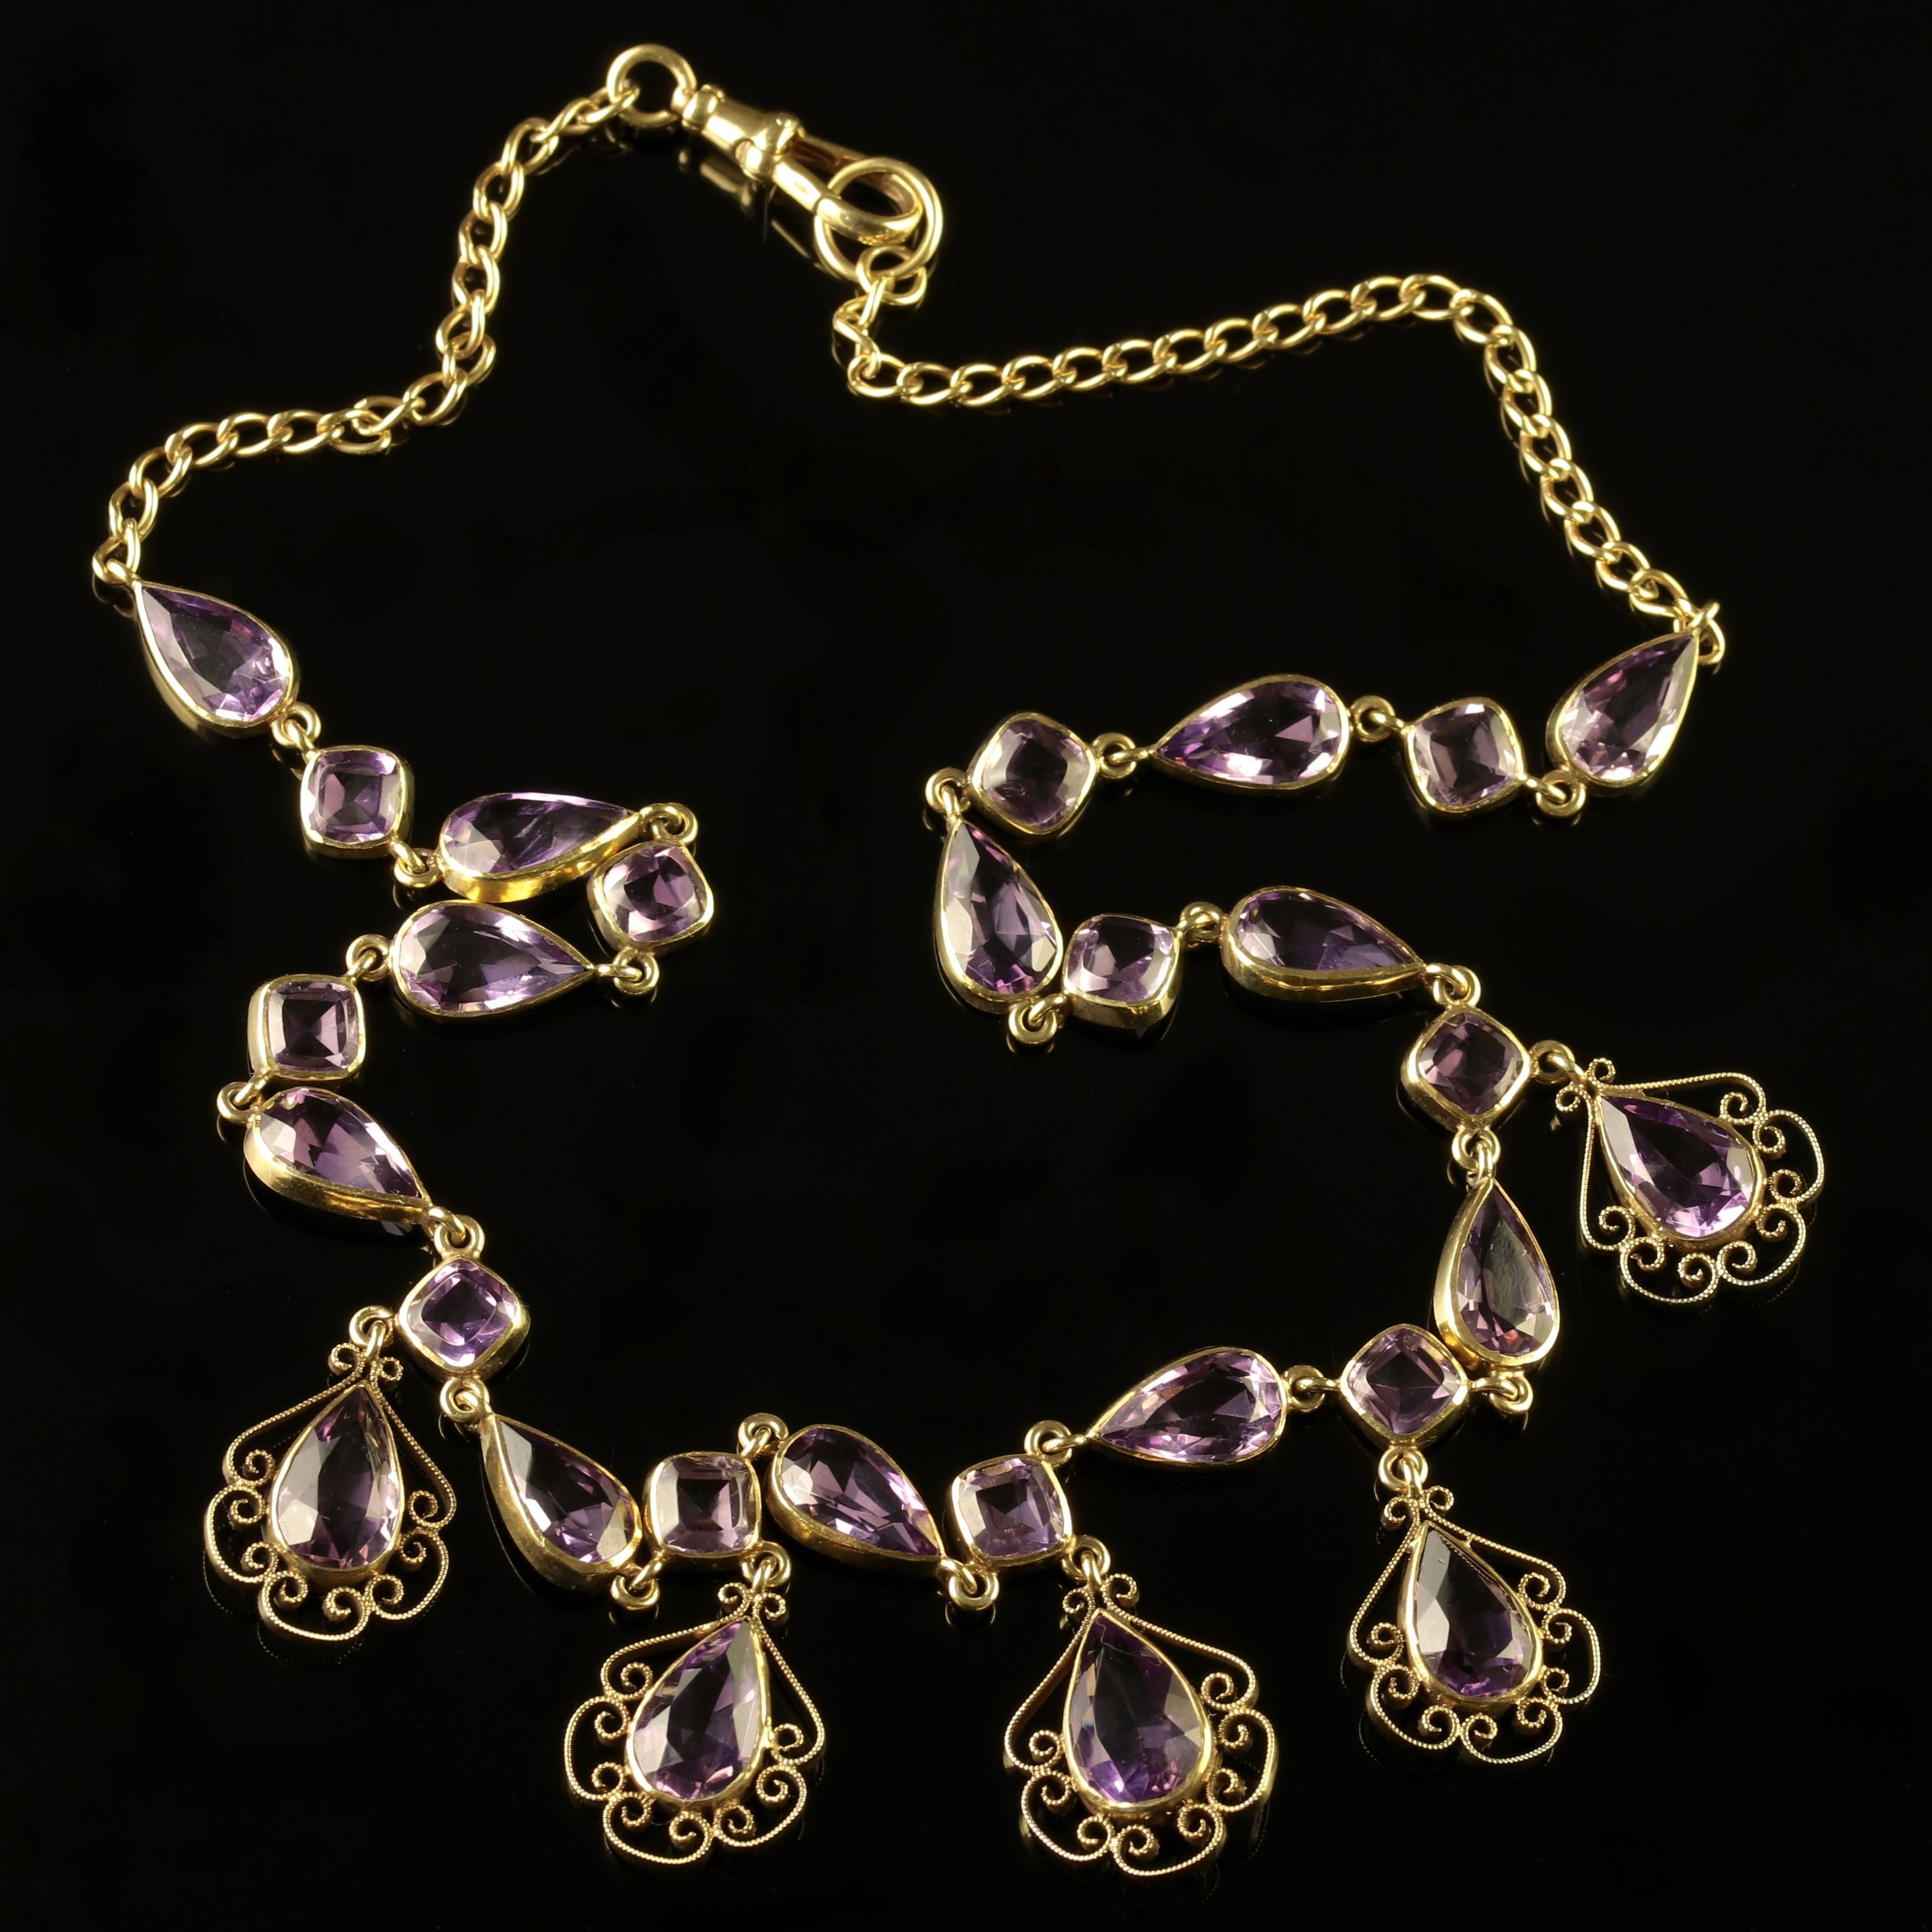 Antique Victorian Amethyst Gold Garland Necklace, circa 1900 For Sale 1